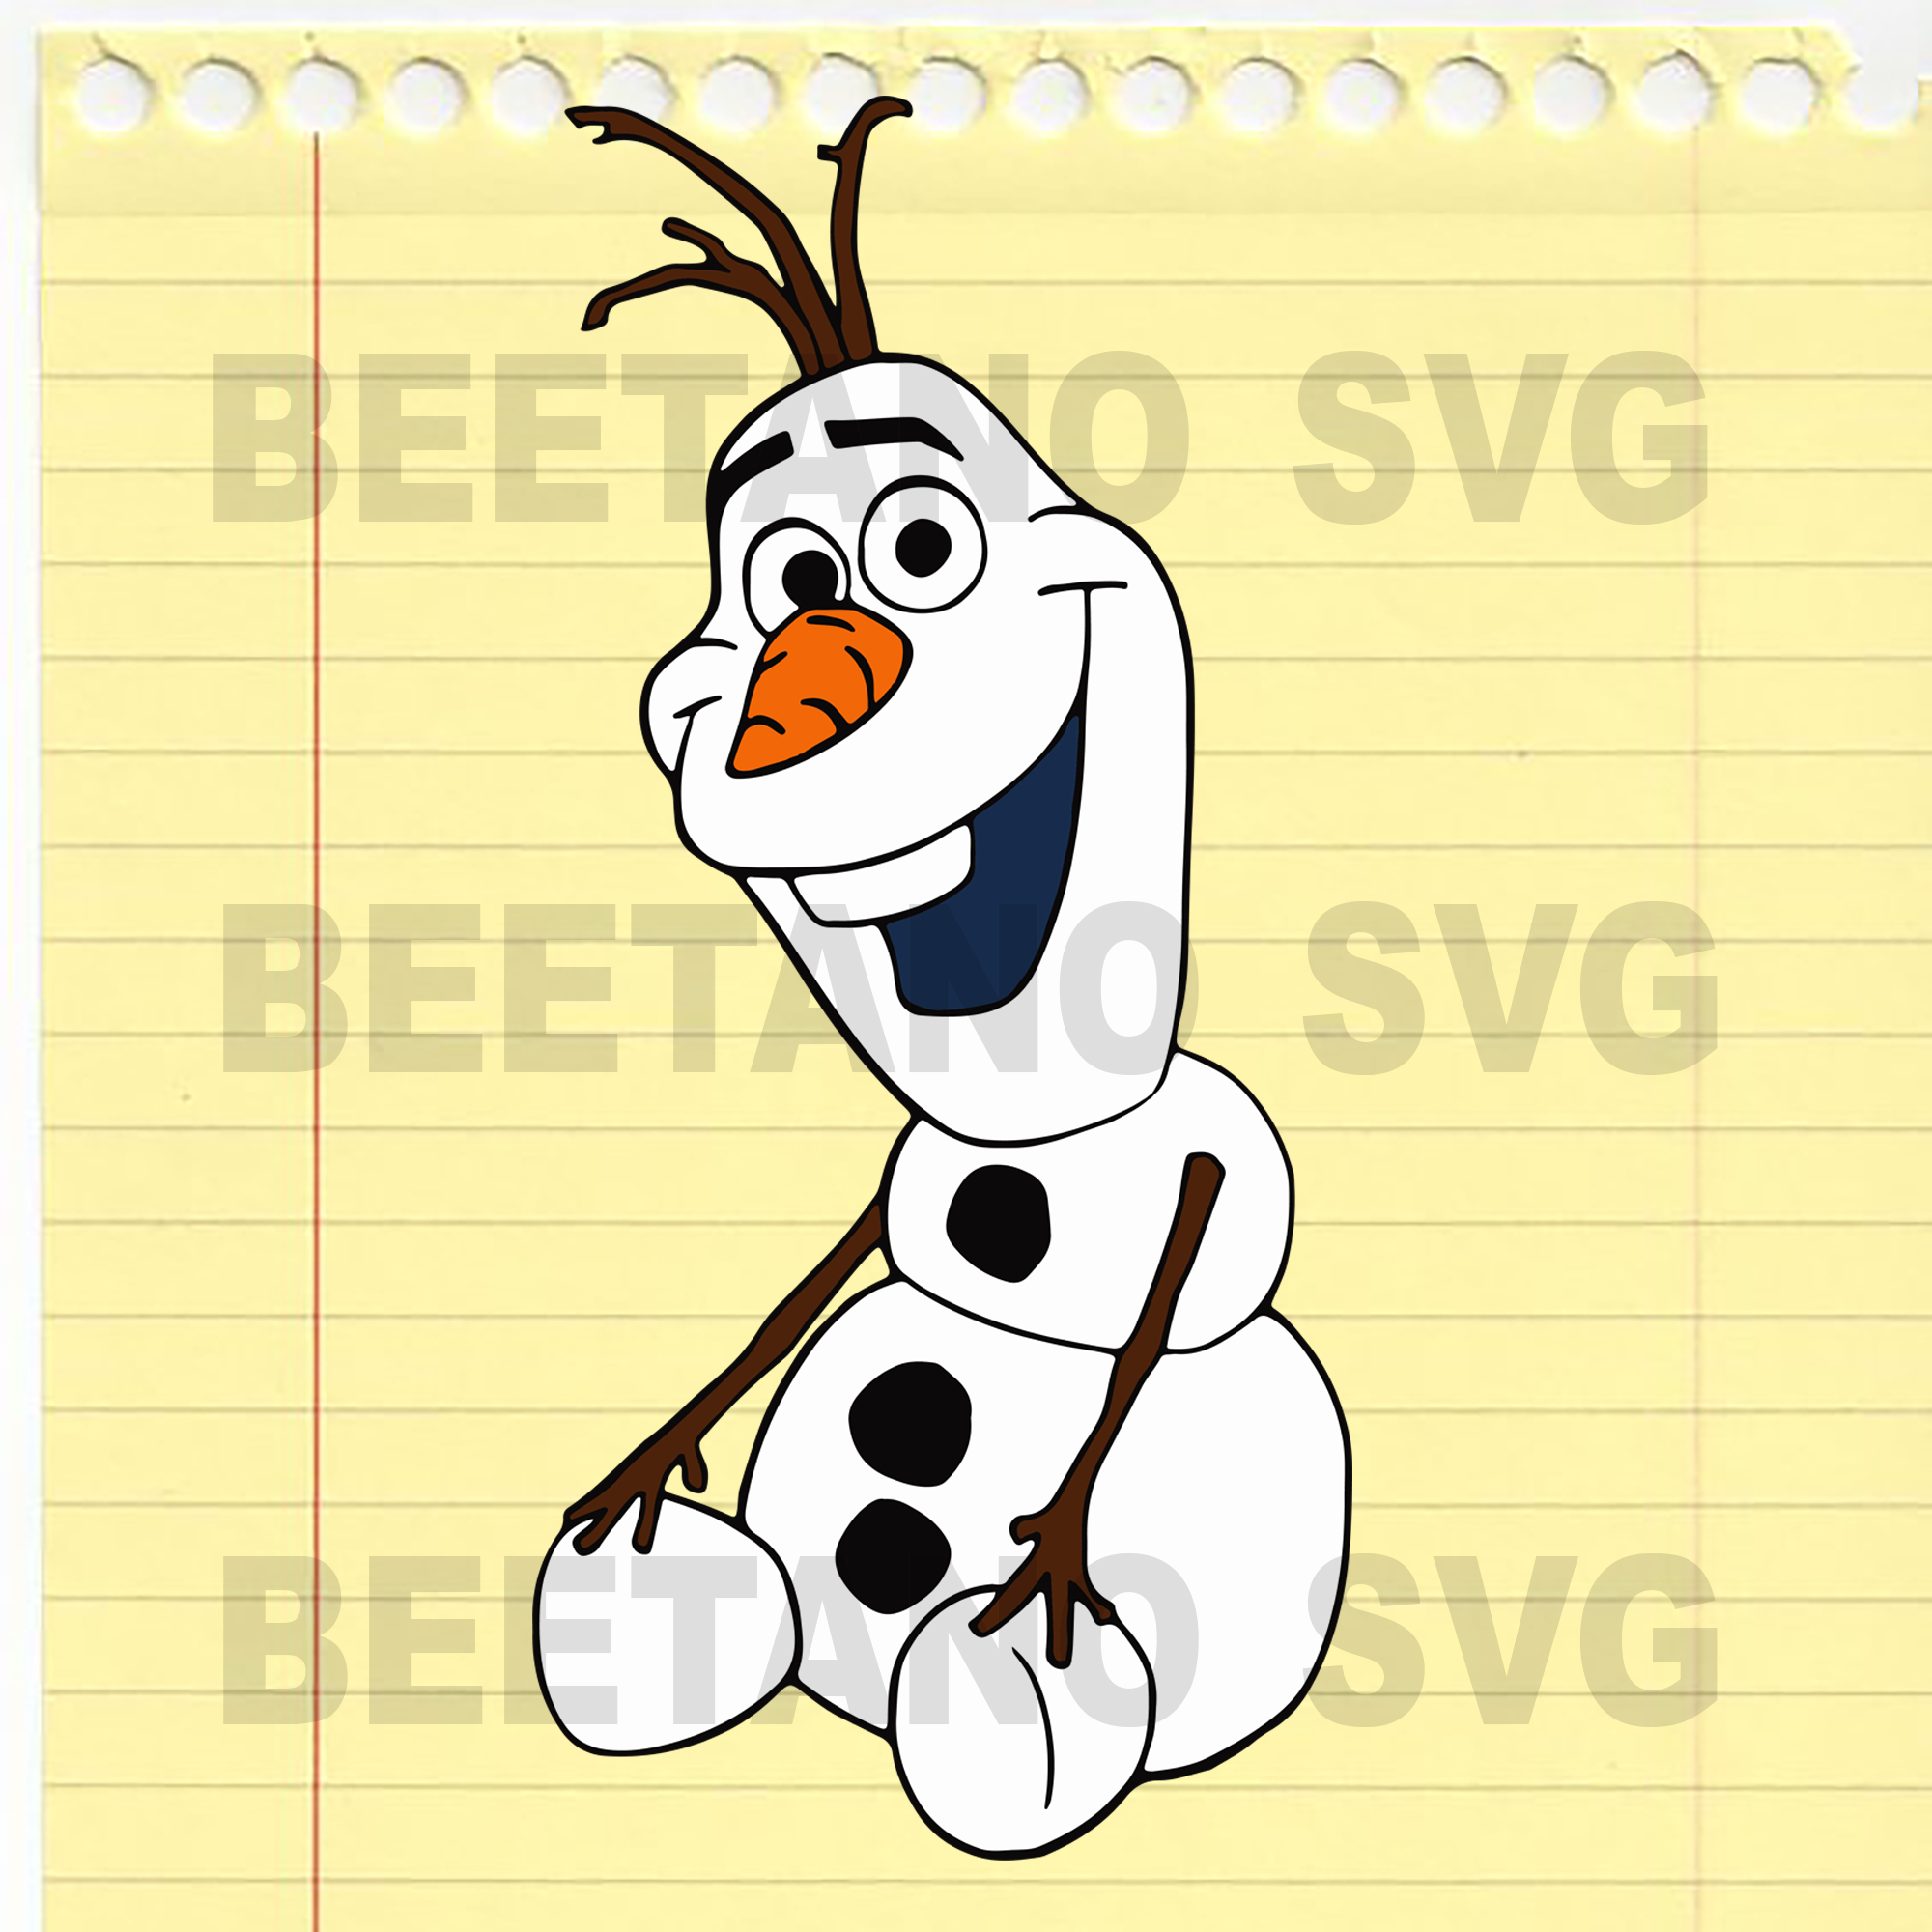 Download Olaf Svg Olaf Svg Files Frozen Olaf Svg Files Olaf Cutting Files Fo Beetanosvg Scalable Vector Graphics PSD Mockup Templates